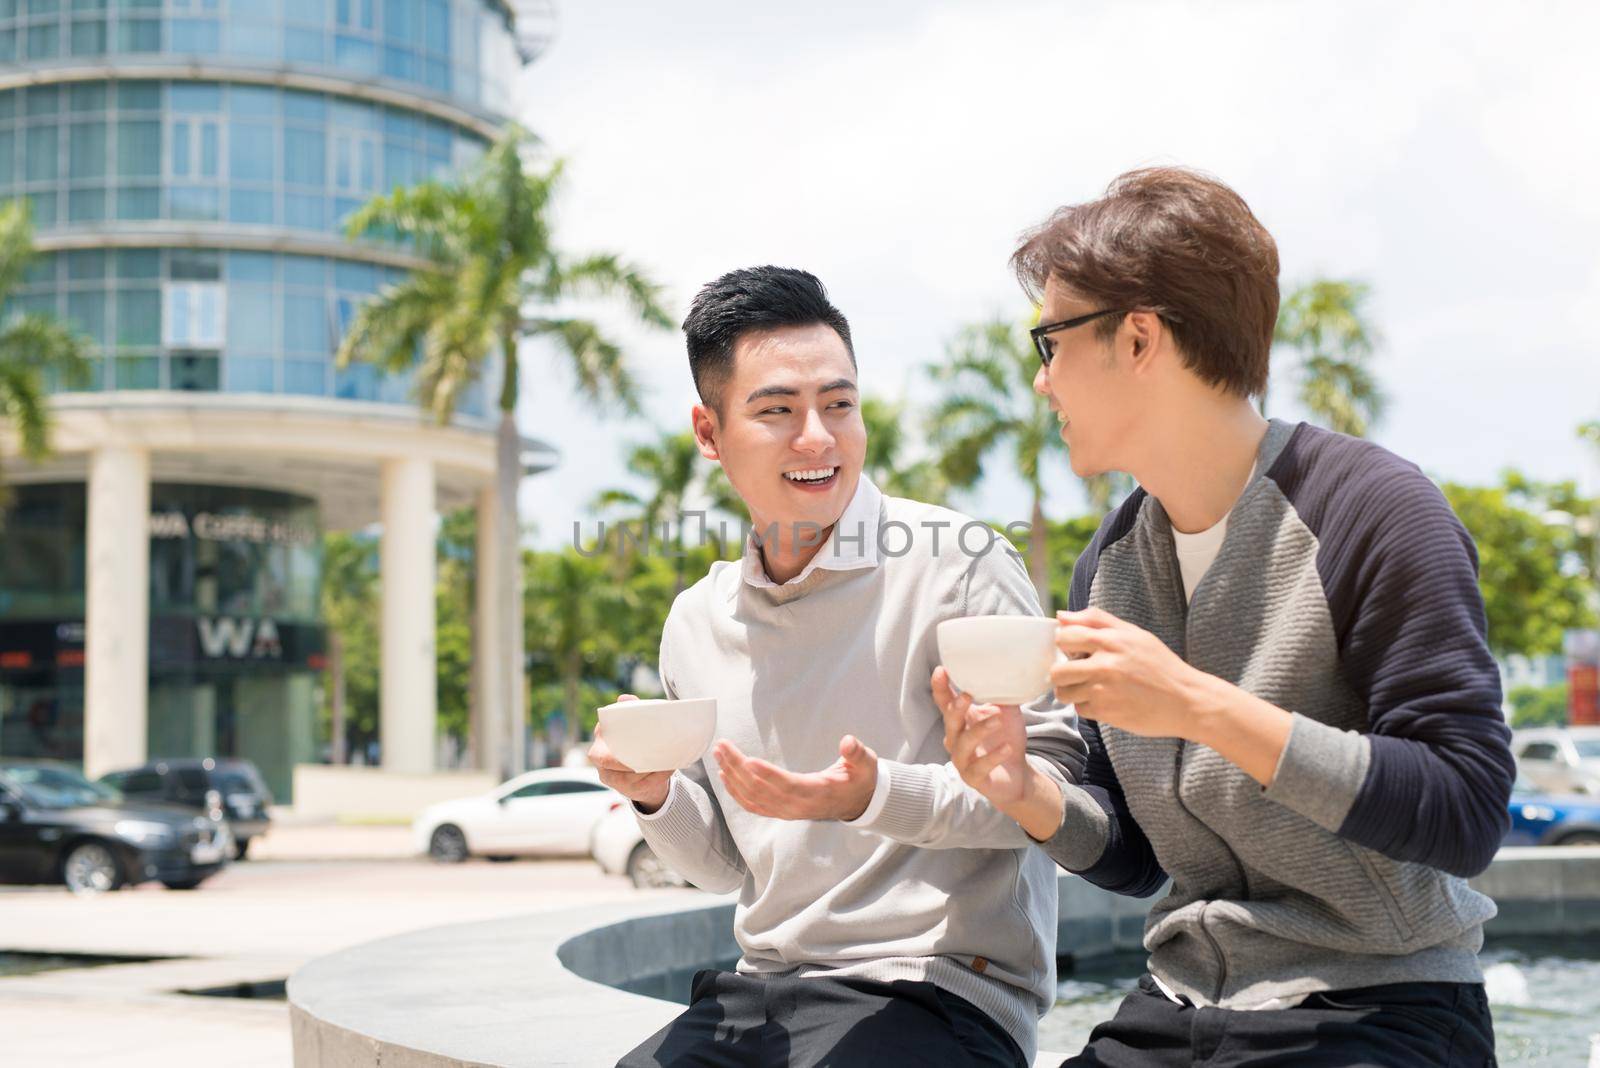 Two businessman having a casual meeting or discussion in the city.